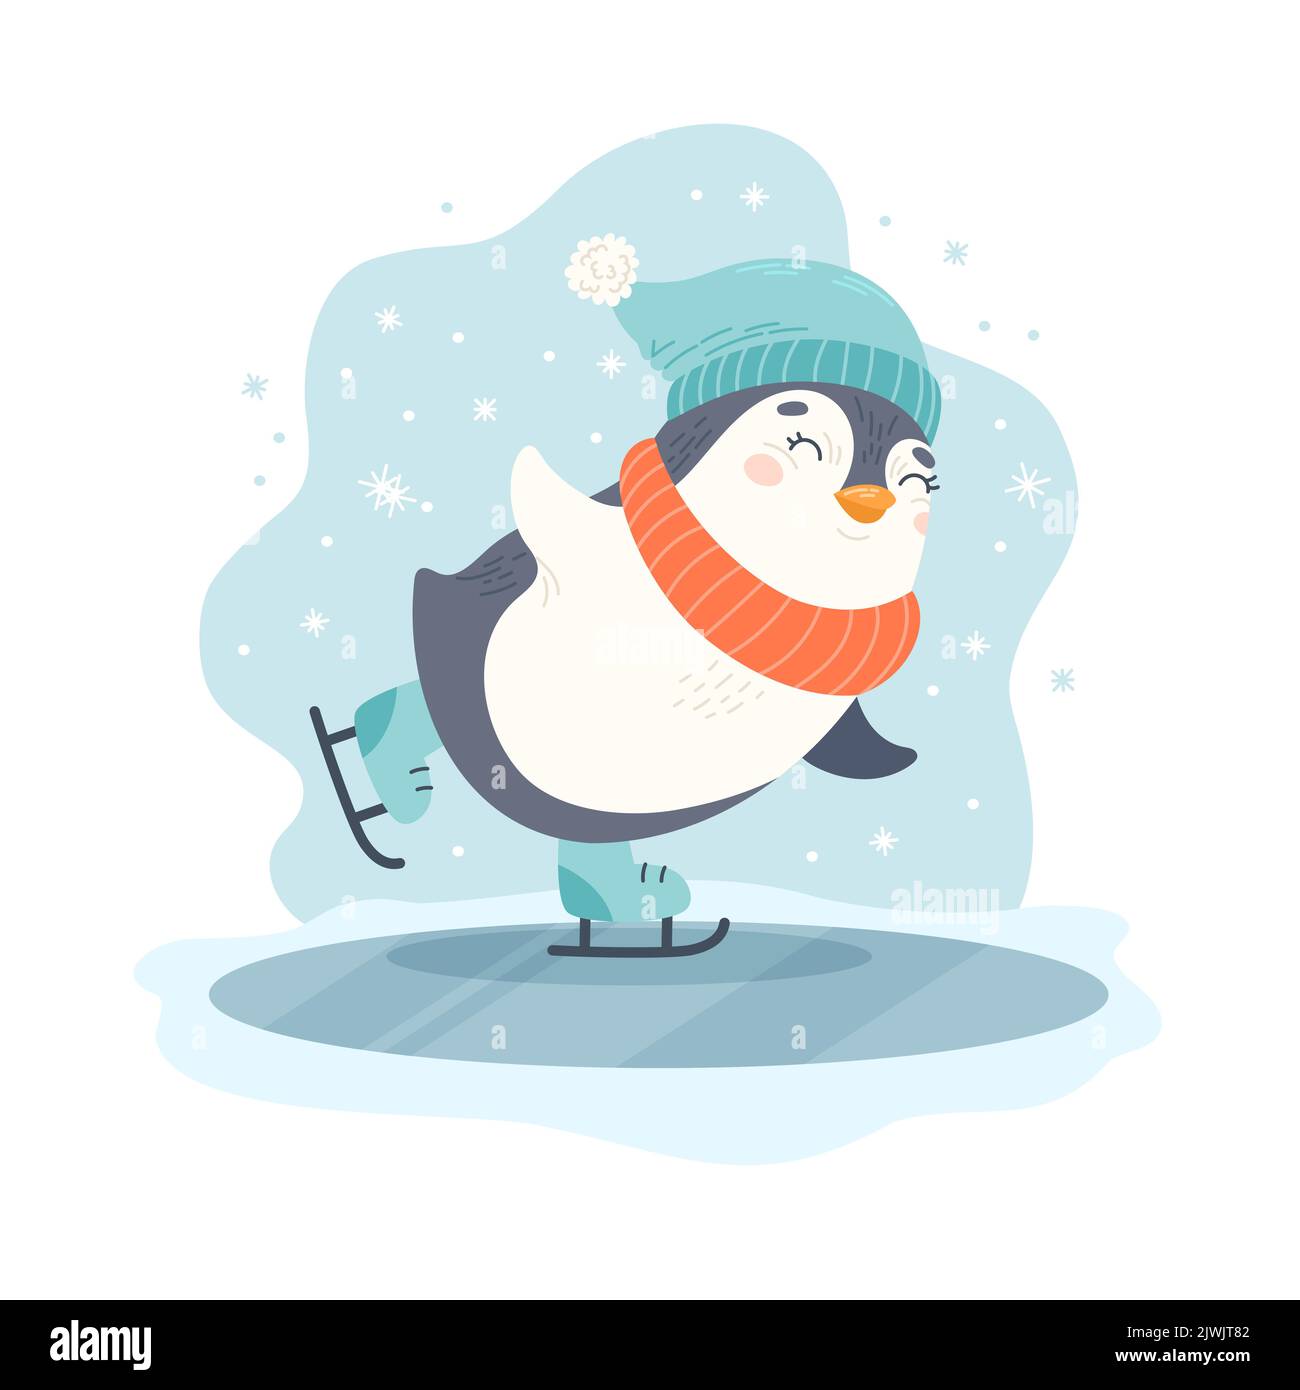 Penguin skating. Winter character with hat and scarf ice skates on ice rink. Cute seasonal vector illustration in flat cartoon style Stock Vector